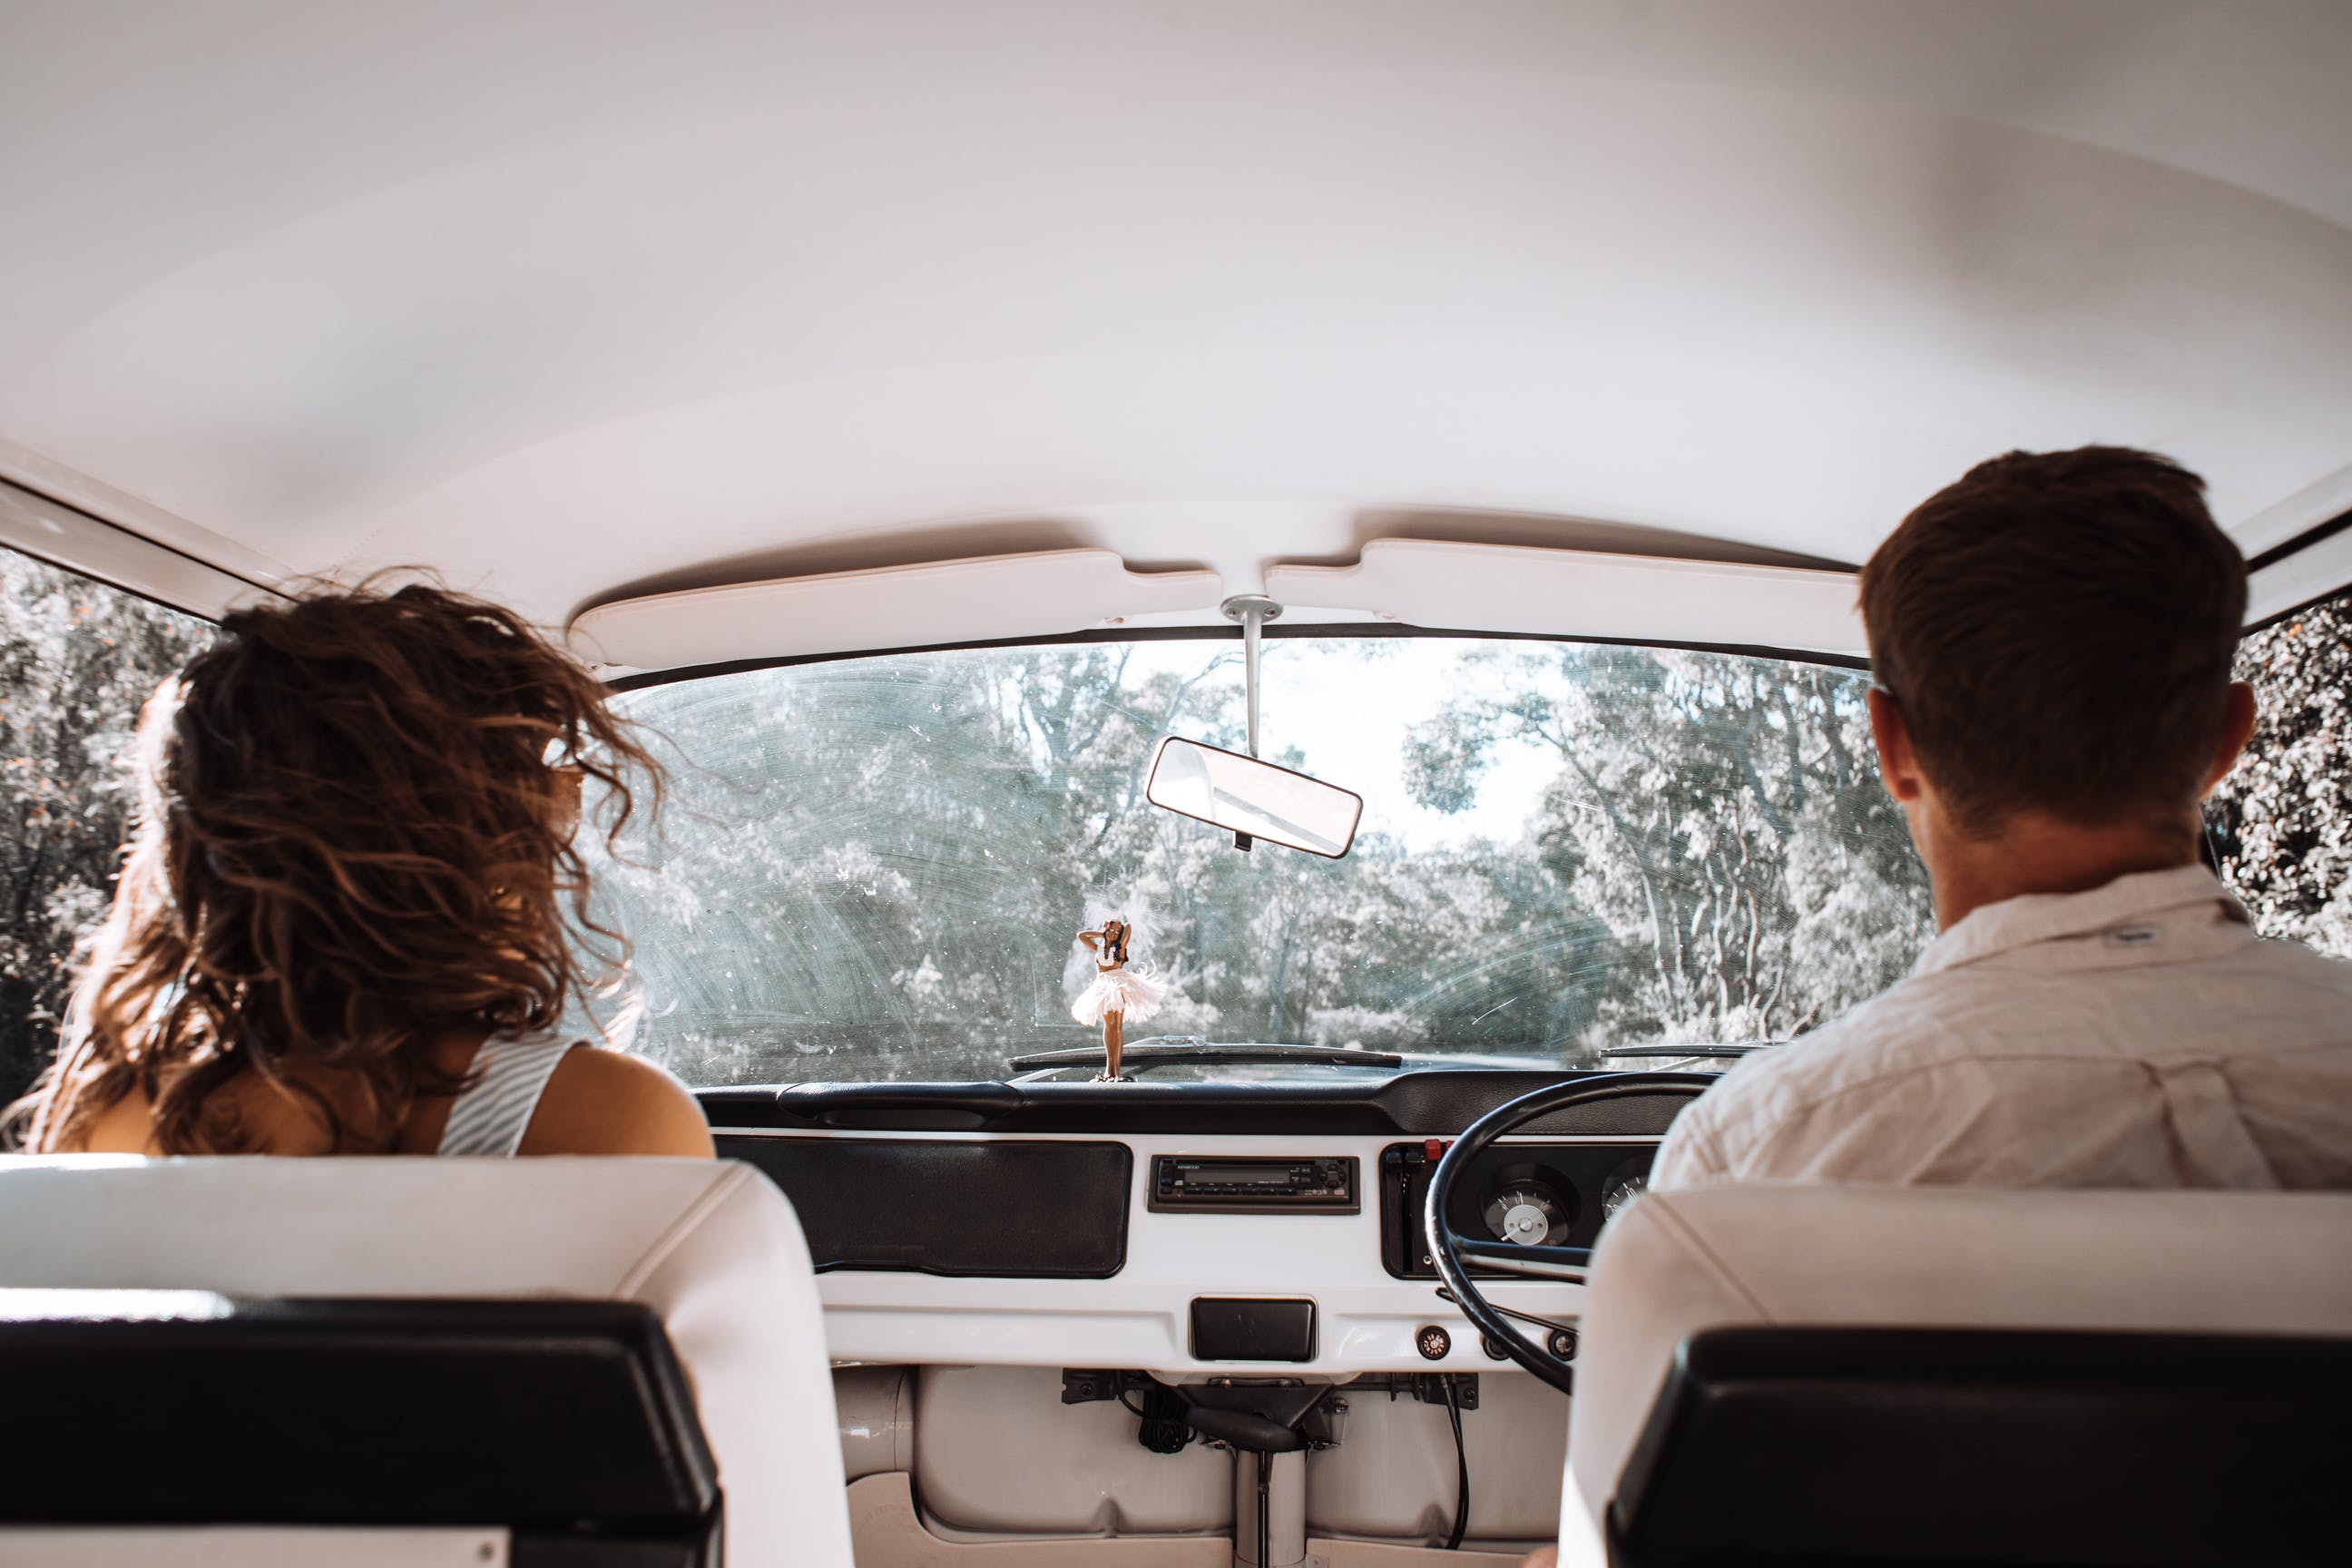 A couple in a car | Source: Pexels